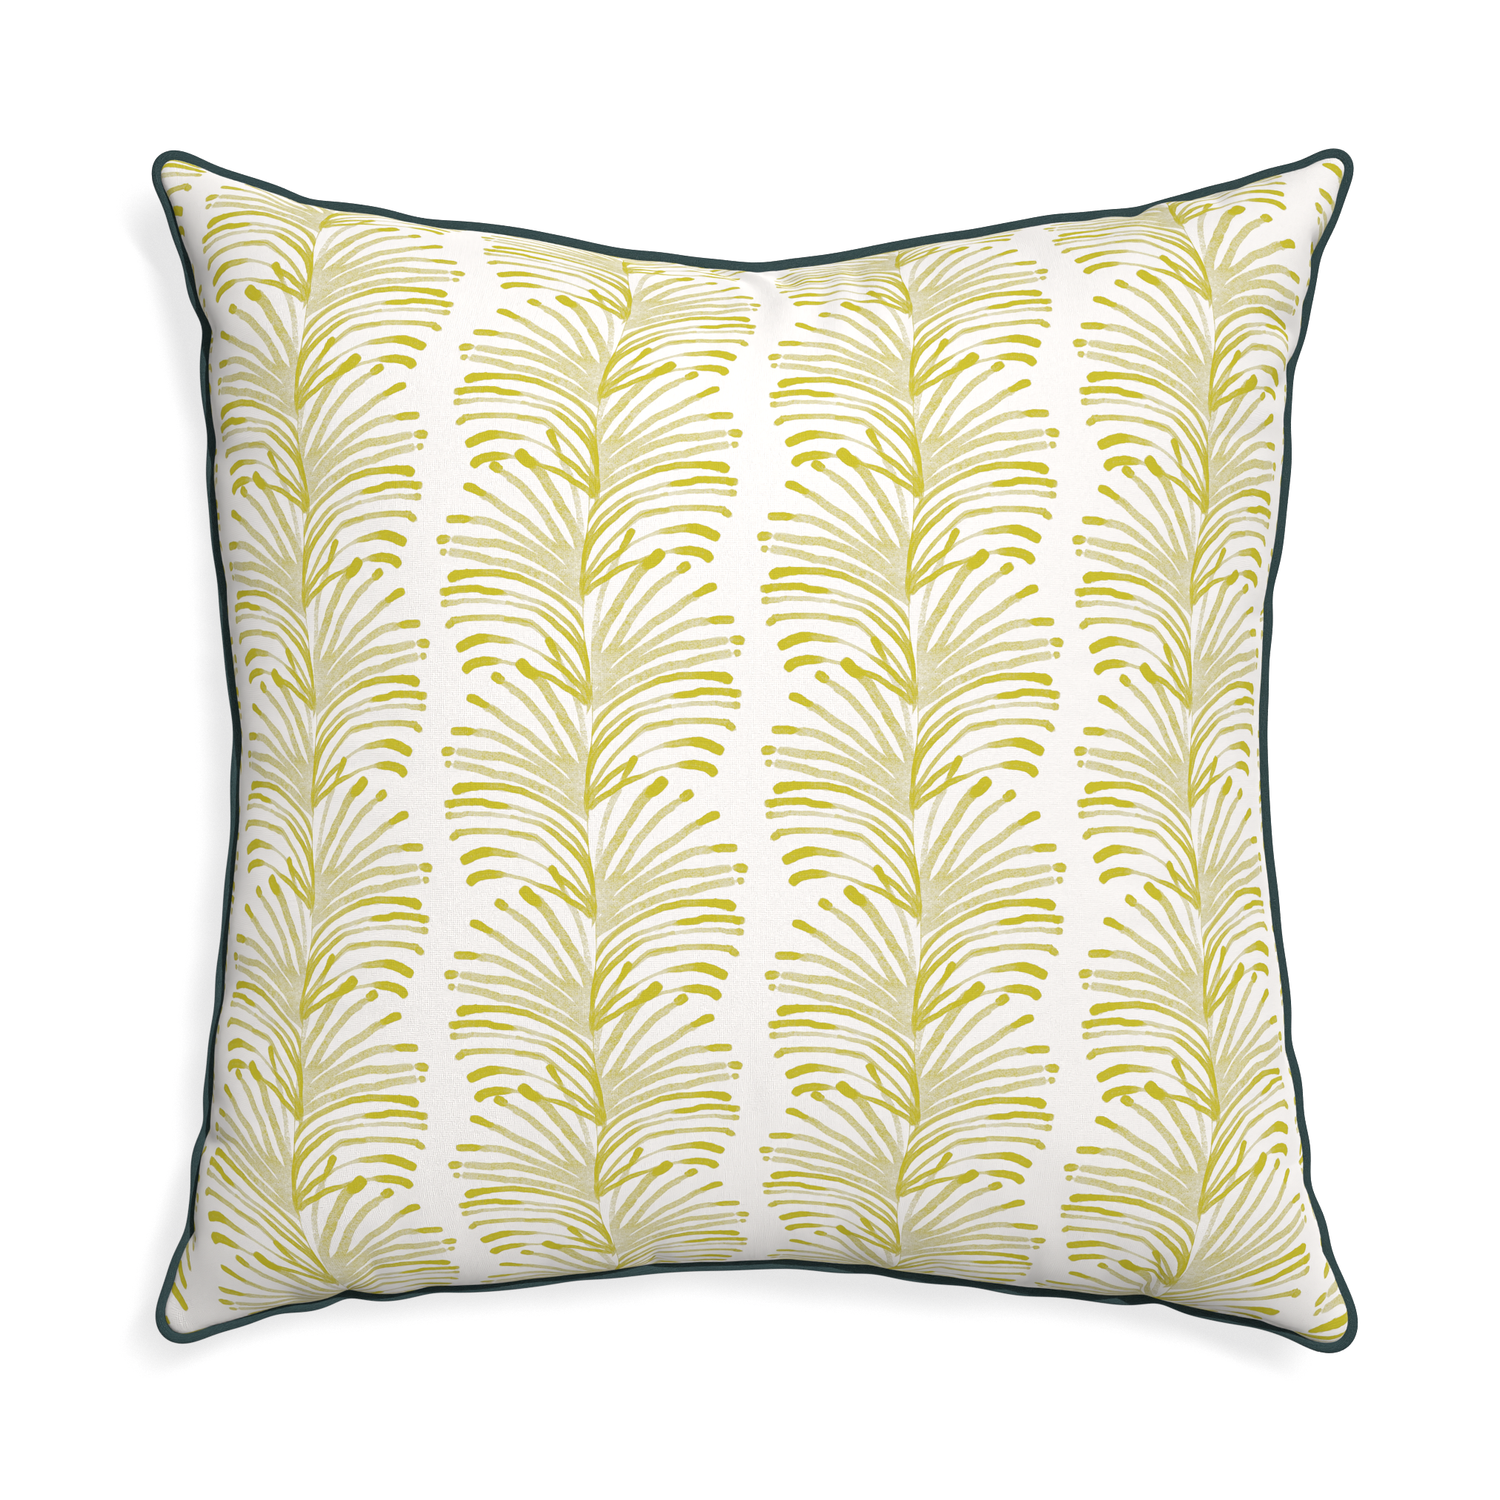 Euro-sham emma chartreuse custom yellow stripe chartreusepillow with p piping on white background